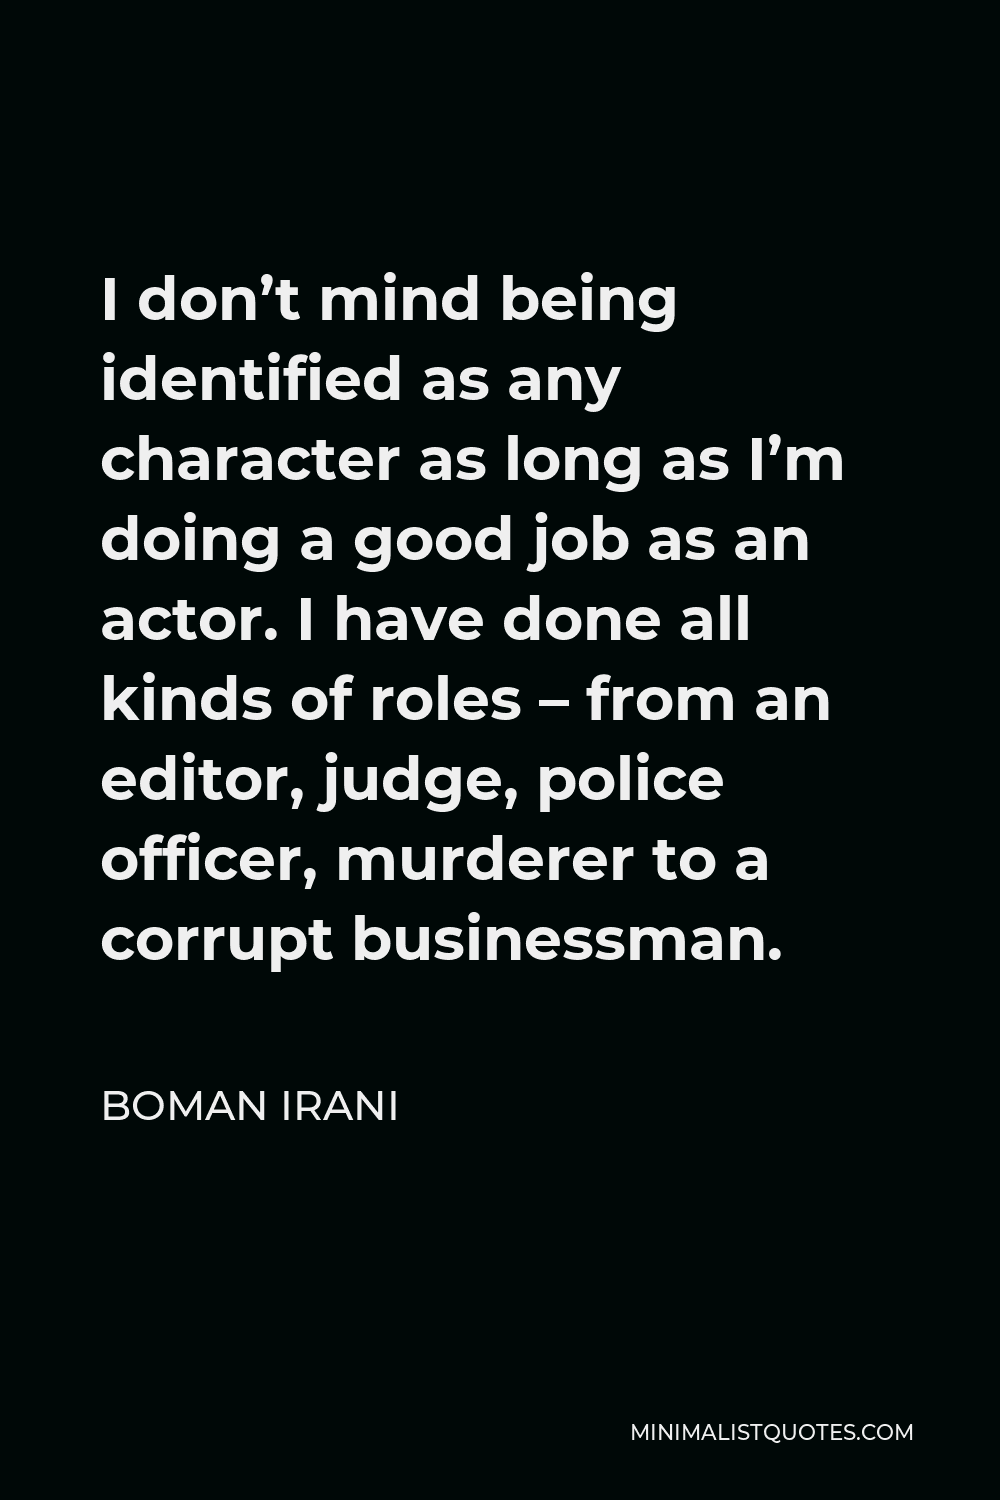 Boman Irani Quote - I don’t mind being identified as any character as long as I’m doing a good job as an actor. I have done all kinds of roles – from an editor, judge, police officer, murderer to a corrupt businessman.